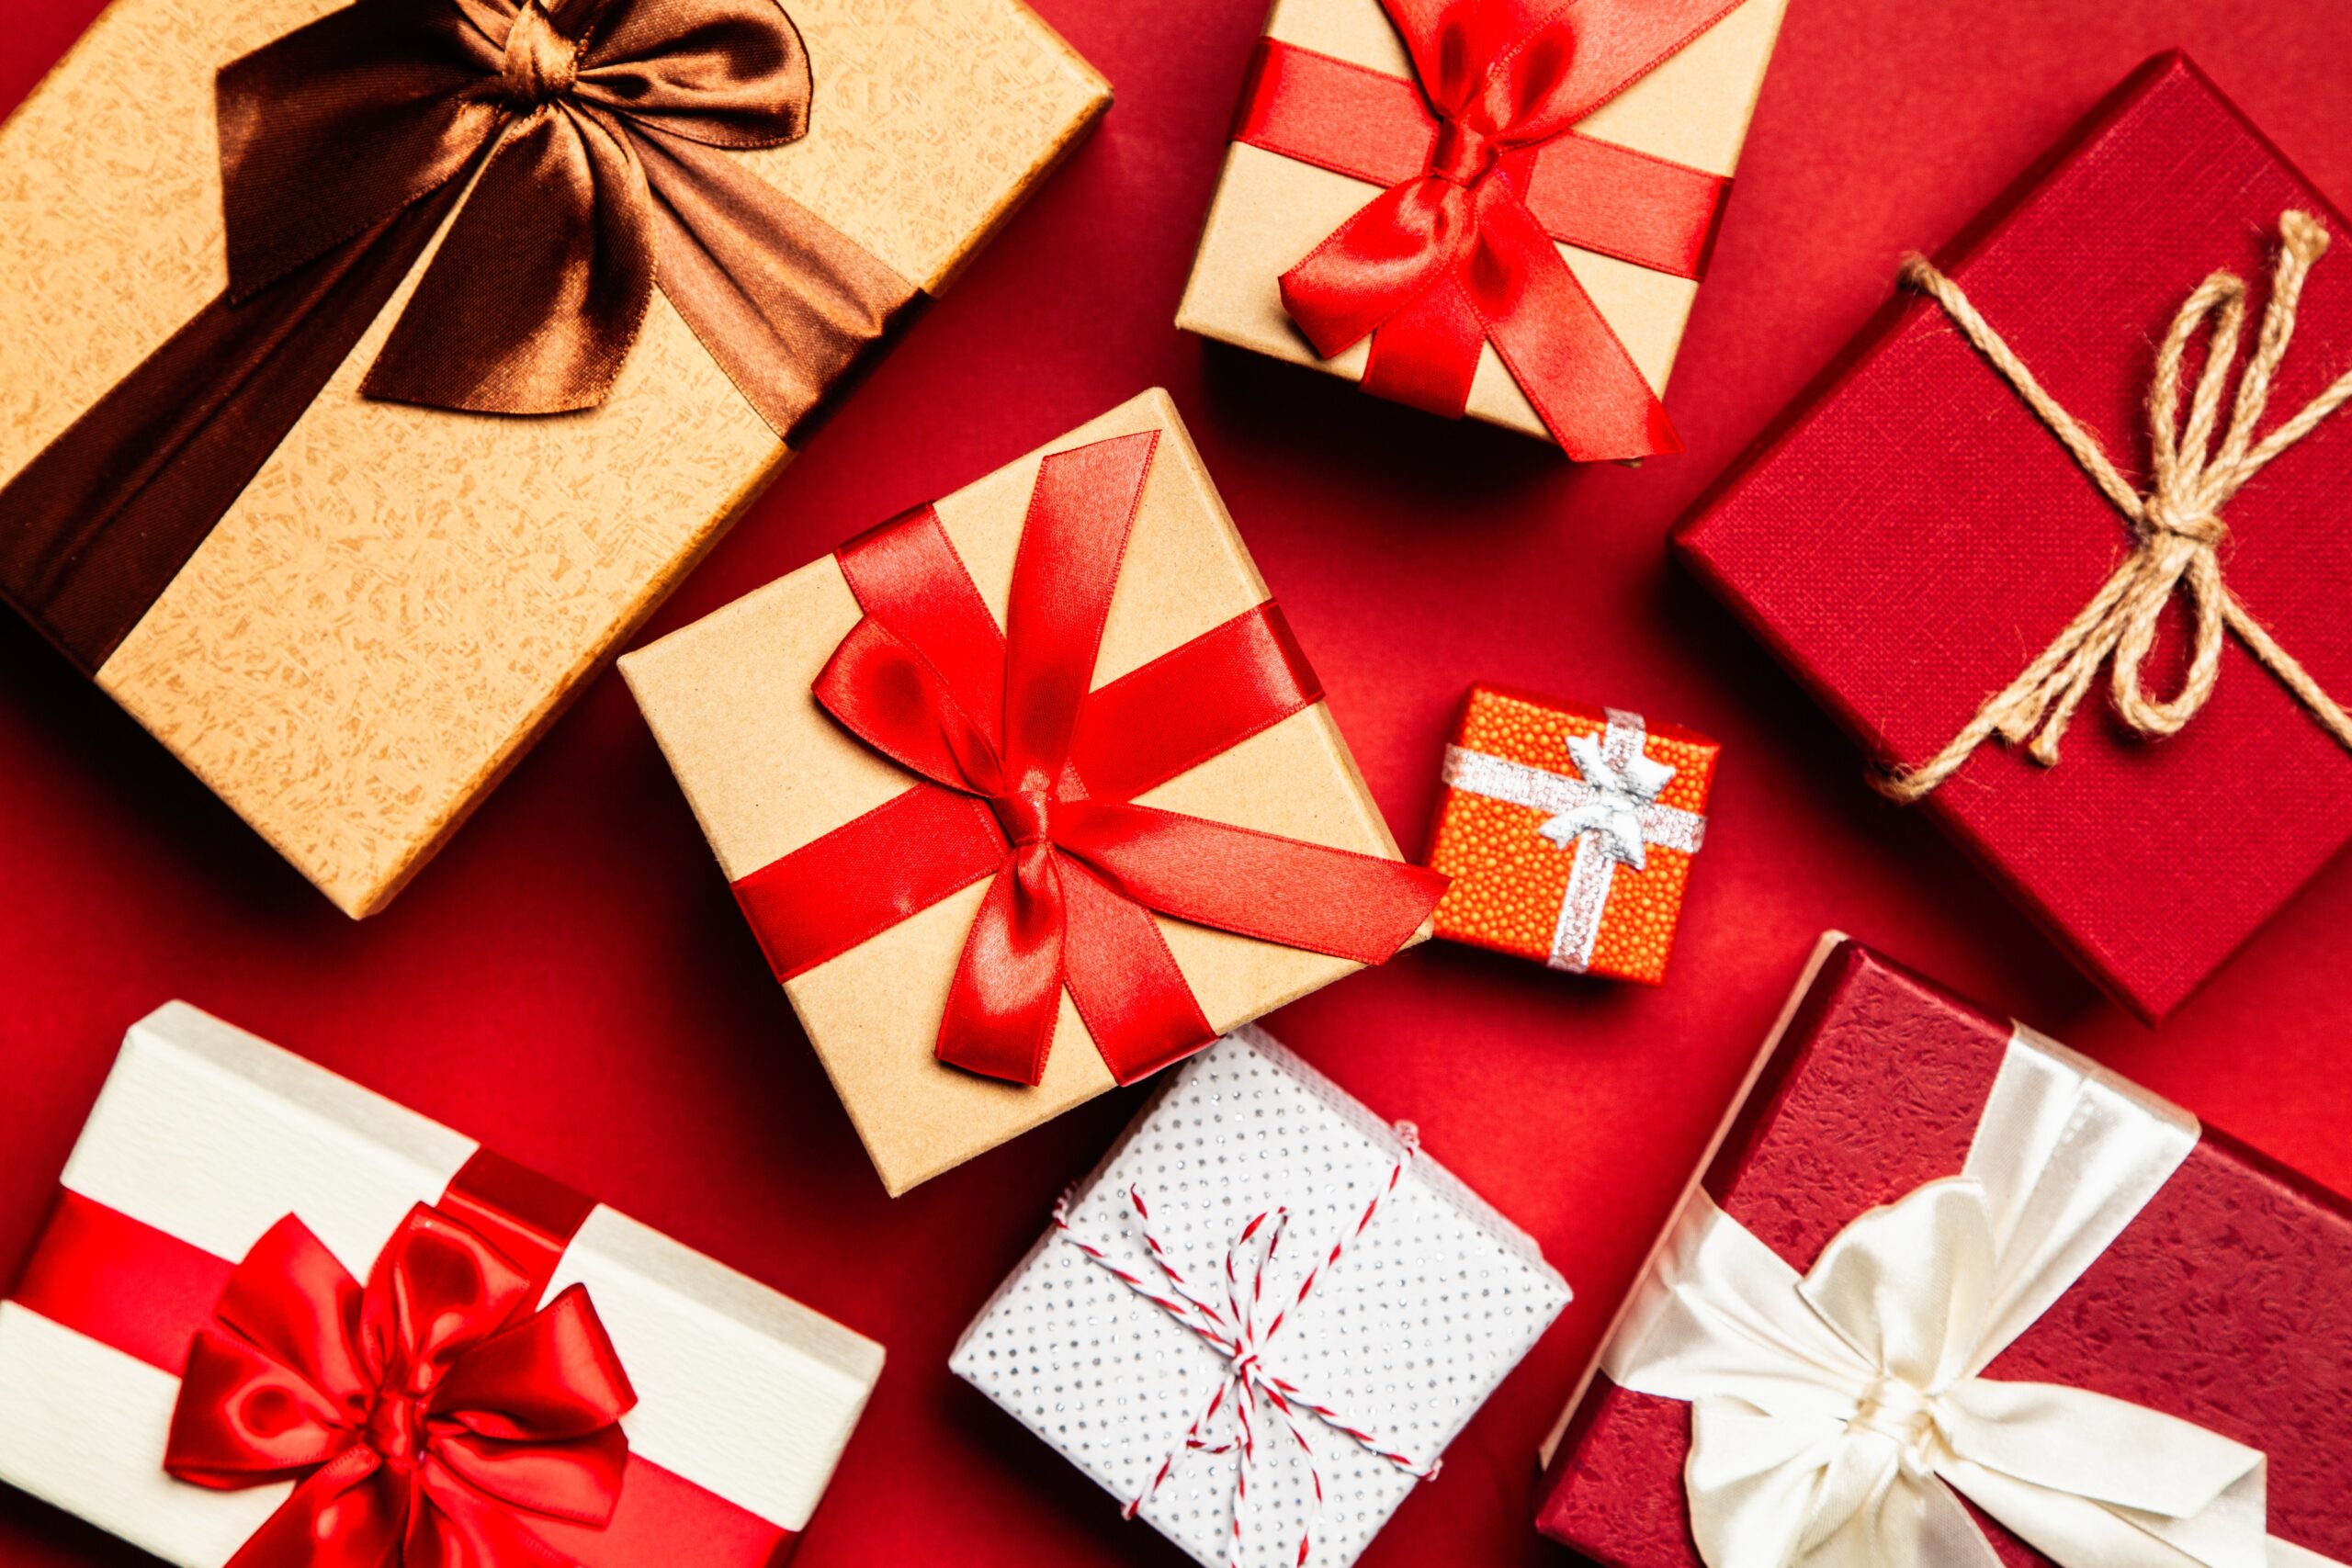 Best Gifts for Lawyers and Attorneys